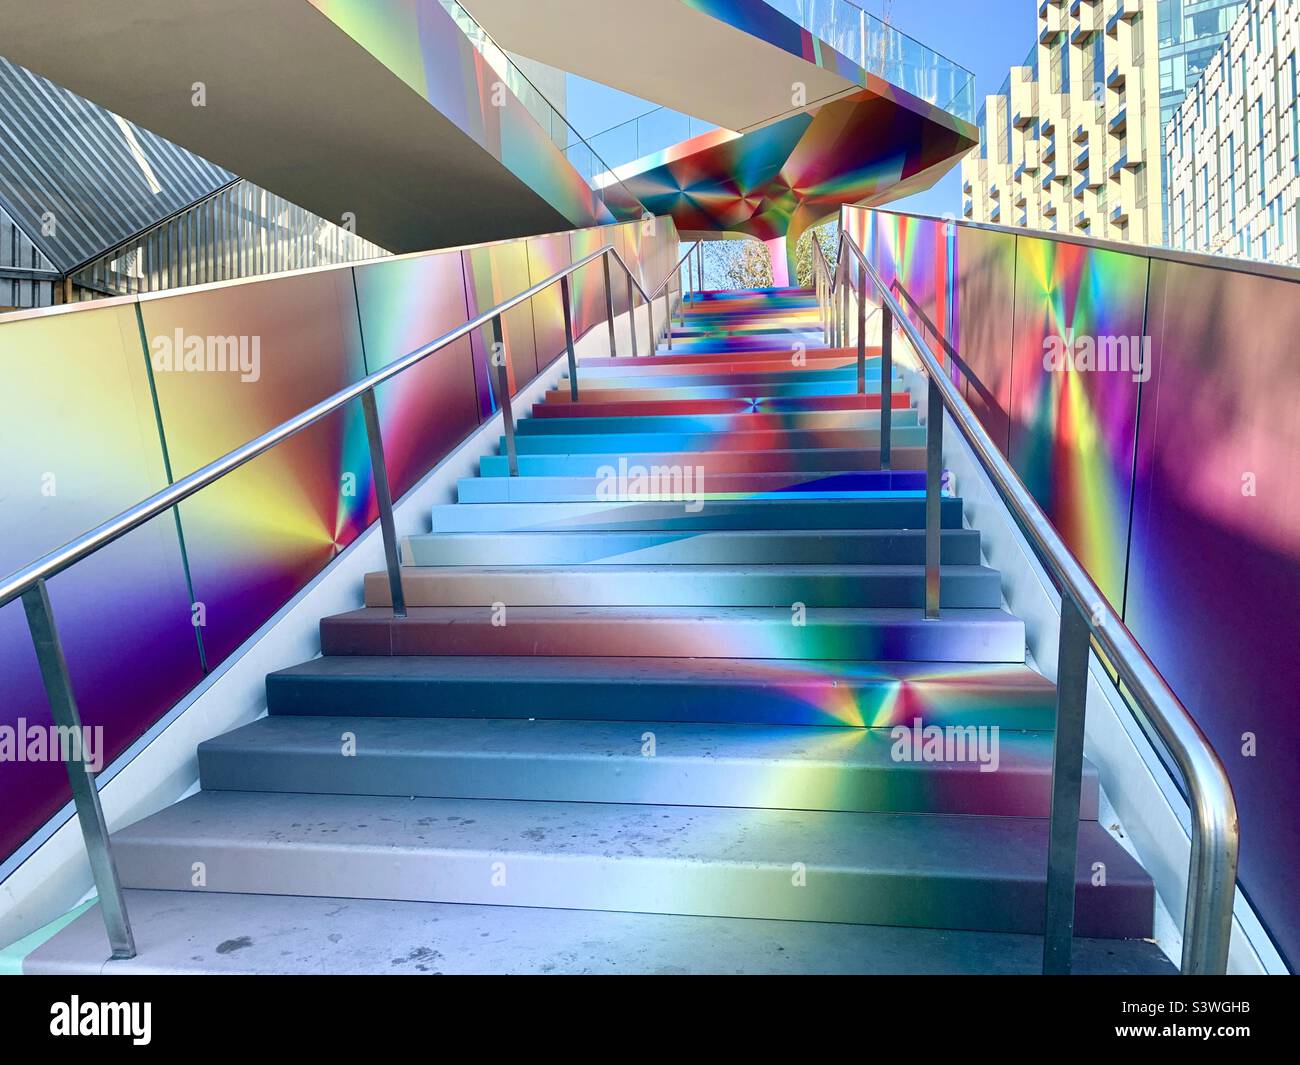 Colourful steps in London’s Greenwich peninsula Stock Photo